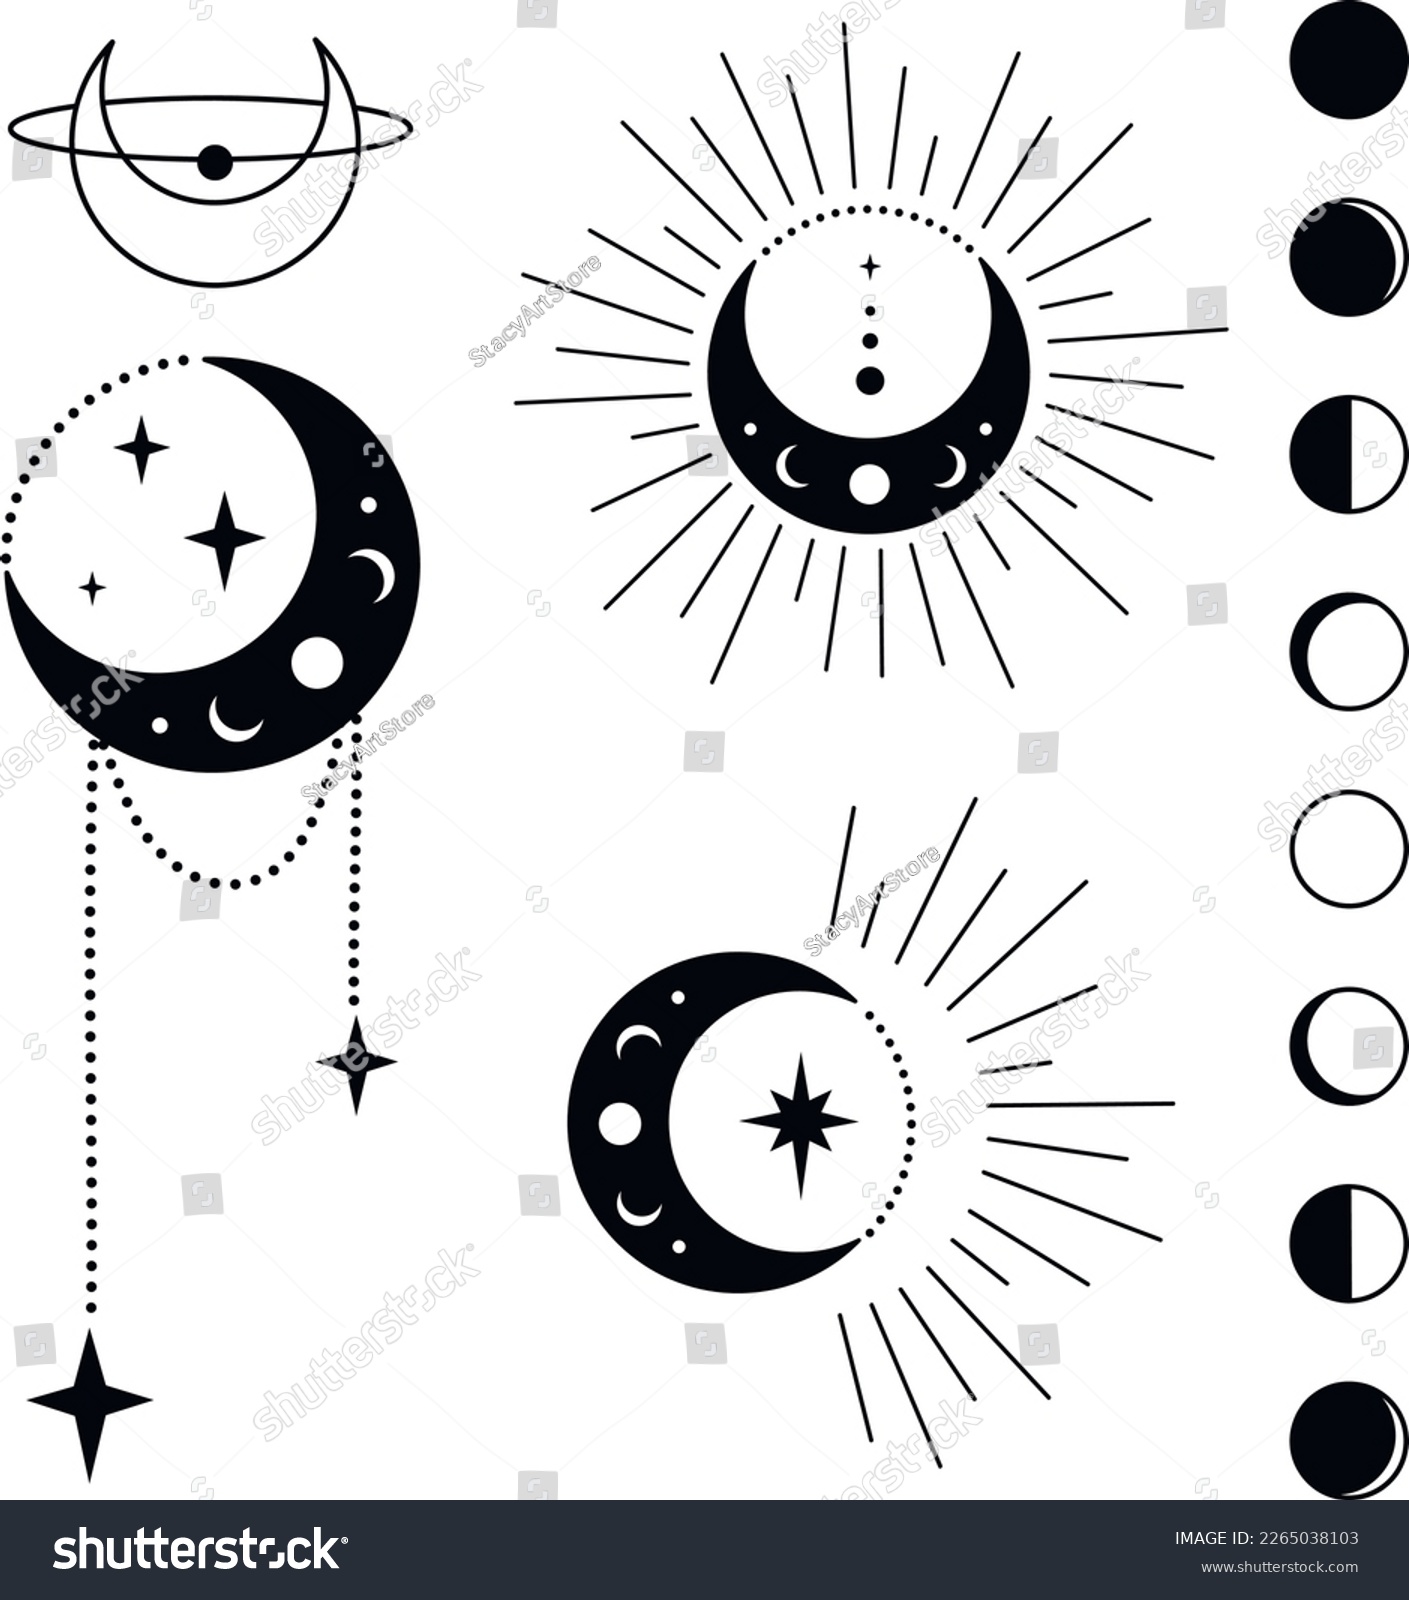 SVG of Bohemian Crescent Moon with Stars and Rays Astrology Illustration. Moon Phases SVG Vector Clipart. Celestial, Mystical, Esoteric designs perfect for Printing. T-shirt, Mugs, Cut Boards Cut File  svg